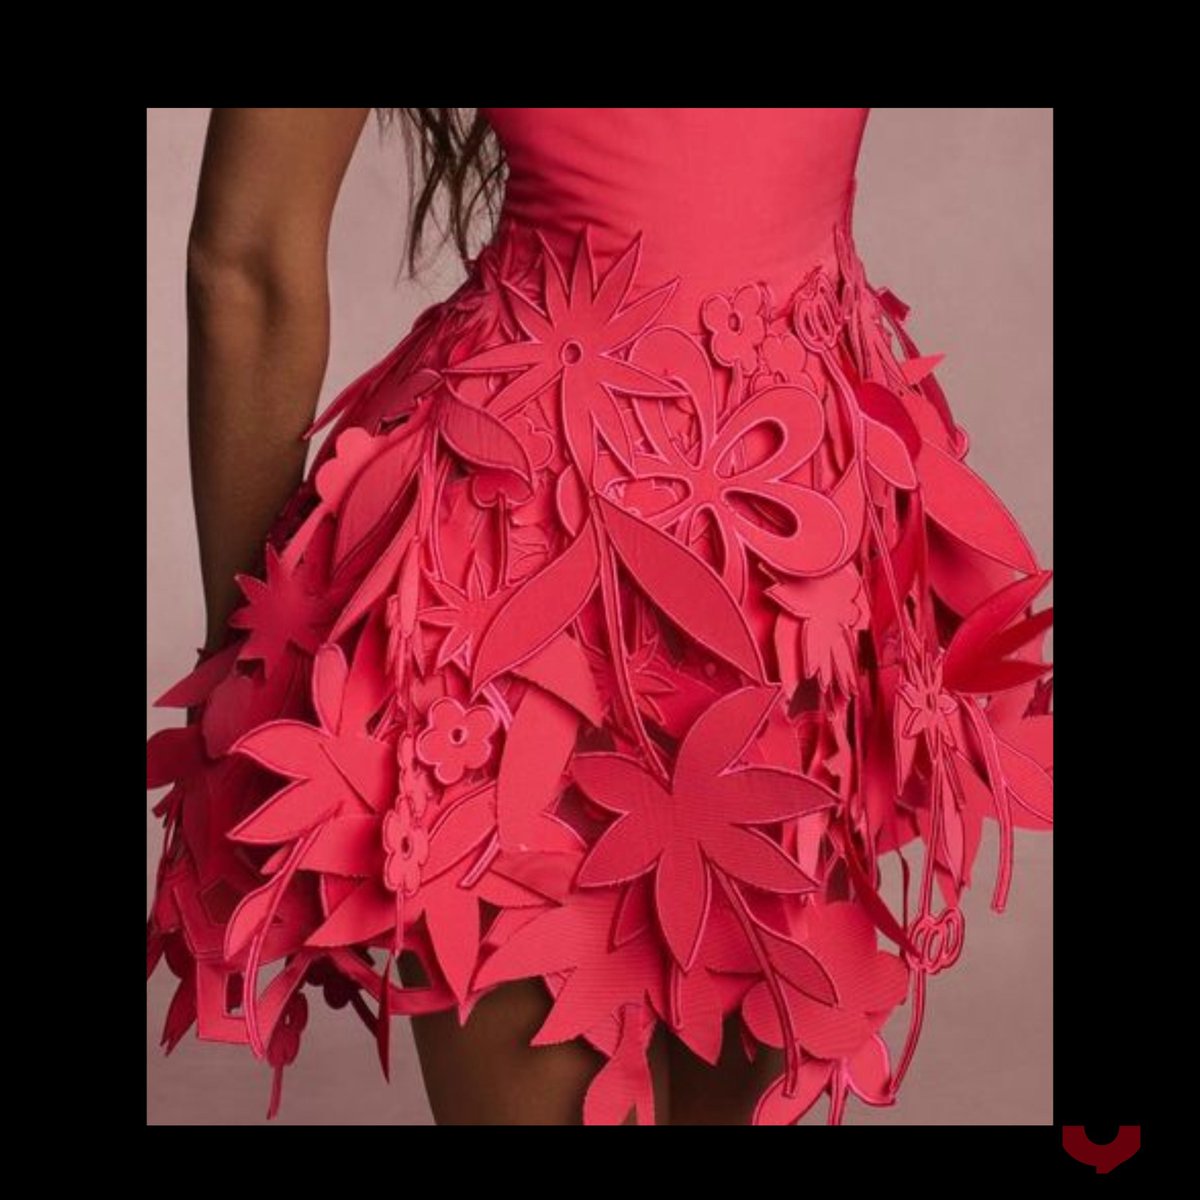 By Yannesque we are sensitive and our eyes are captivated by Art and creativity, the designer of Oscar de la Renta are so  creative, we love this dress with texture in our iconic red pantone #yannesquelikes #artiseverywhere